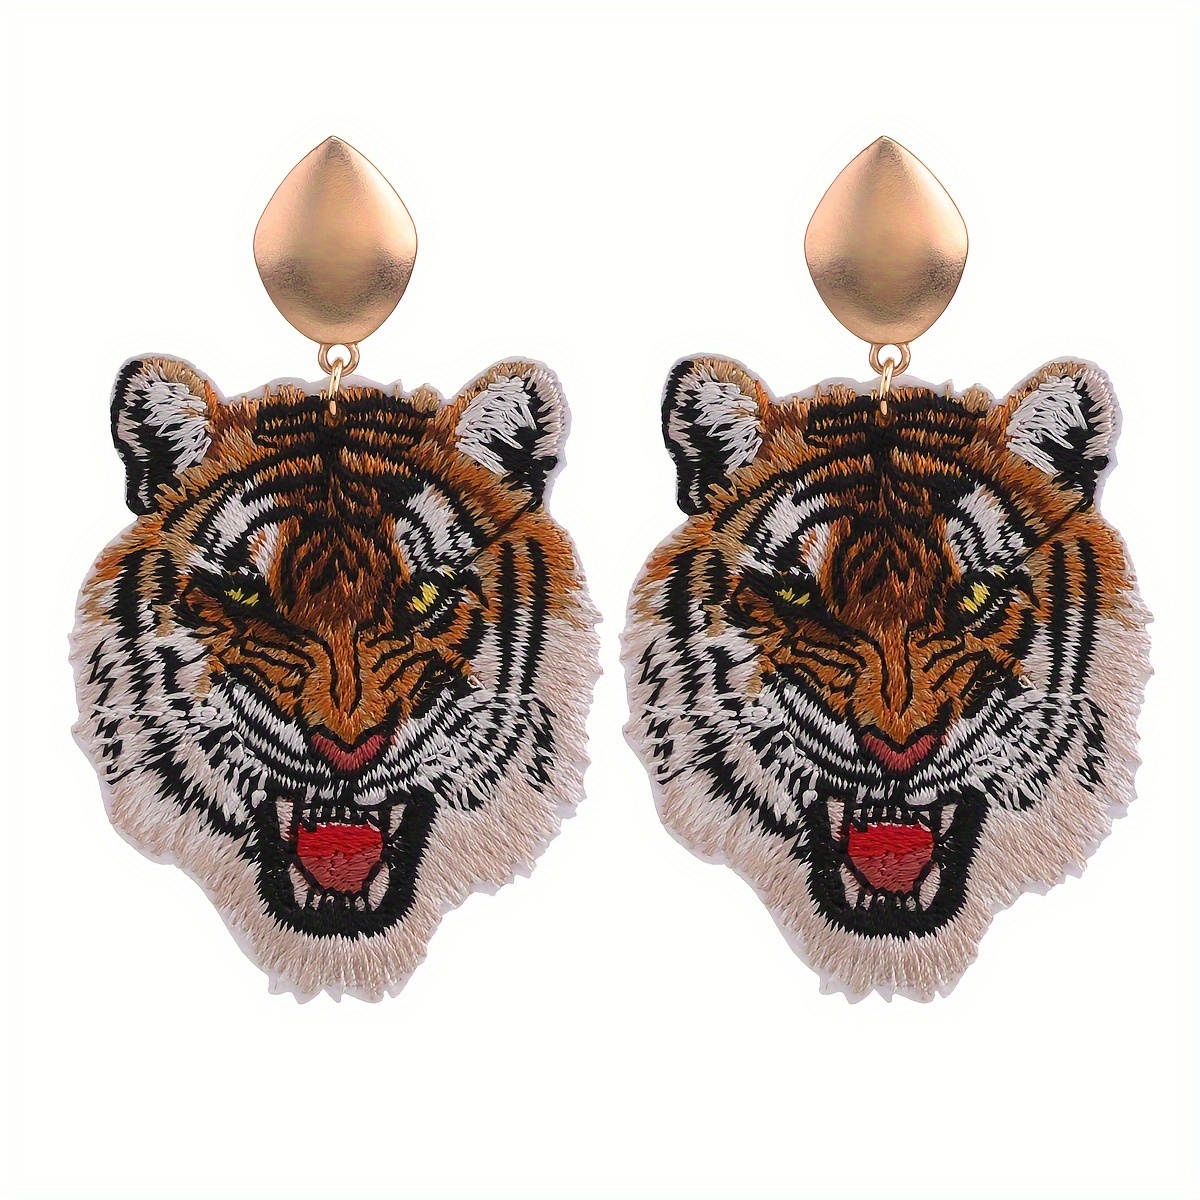 

Stylish Dangle Earrings Roaring Tiger Design Symbol Of Power And Strength Match Daily Outfits Party Accessories Statement Earrings